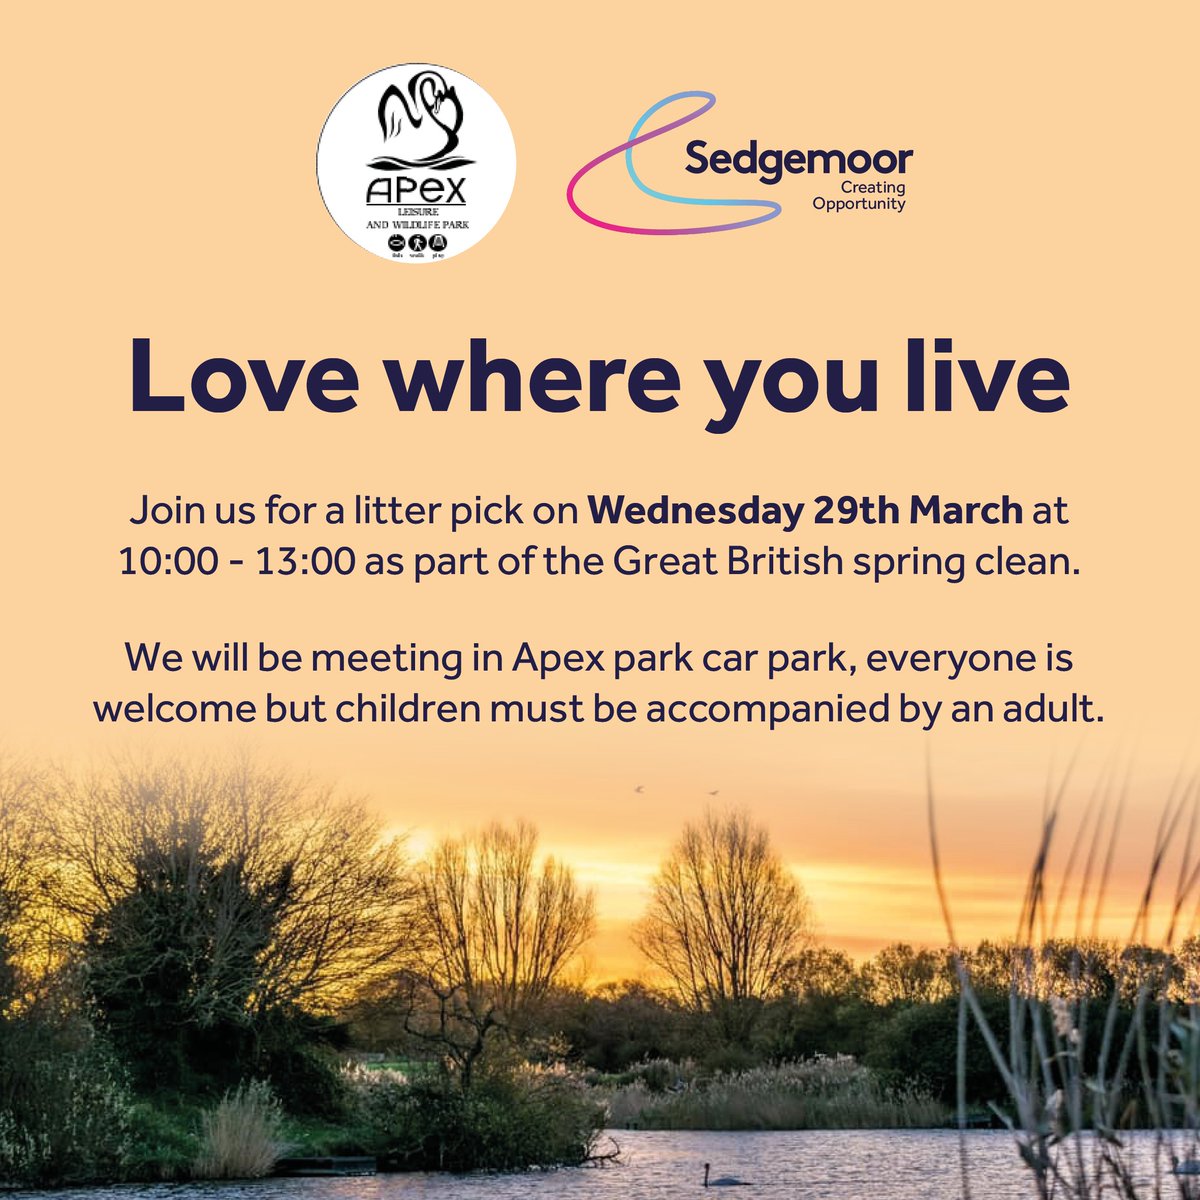 Don't forget that as part of the #GreatBritishSpringClean you can join us and the Friends of Apex Park for a litter pick tomorrow (29/03) at Apex Park between 10am and 1pm Equipment will be provided and everyone is welcome but children must be accompanied by an adult #LoveParks